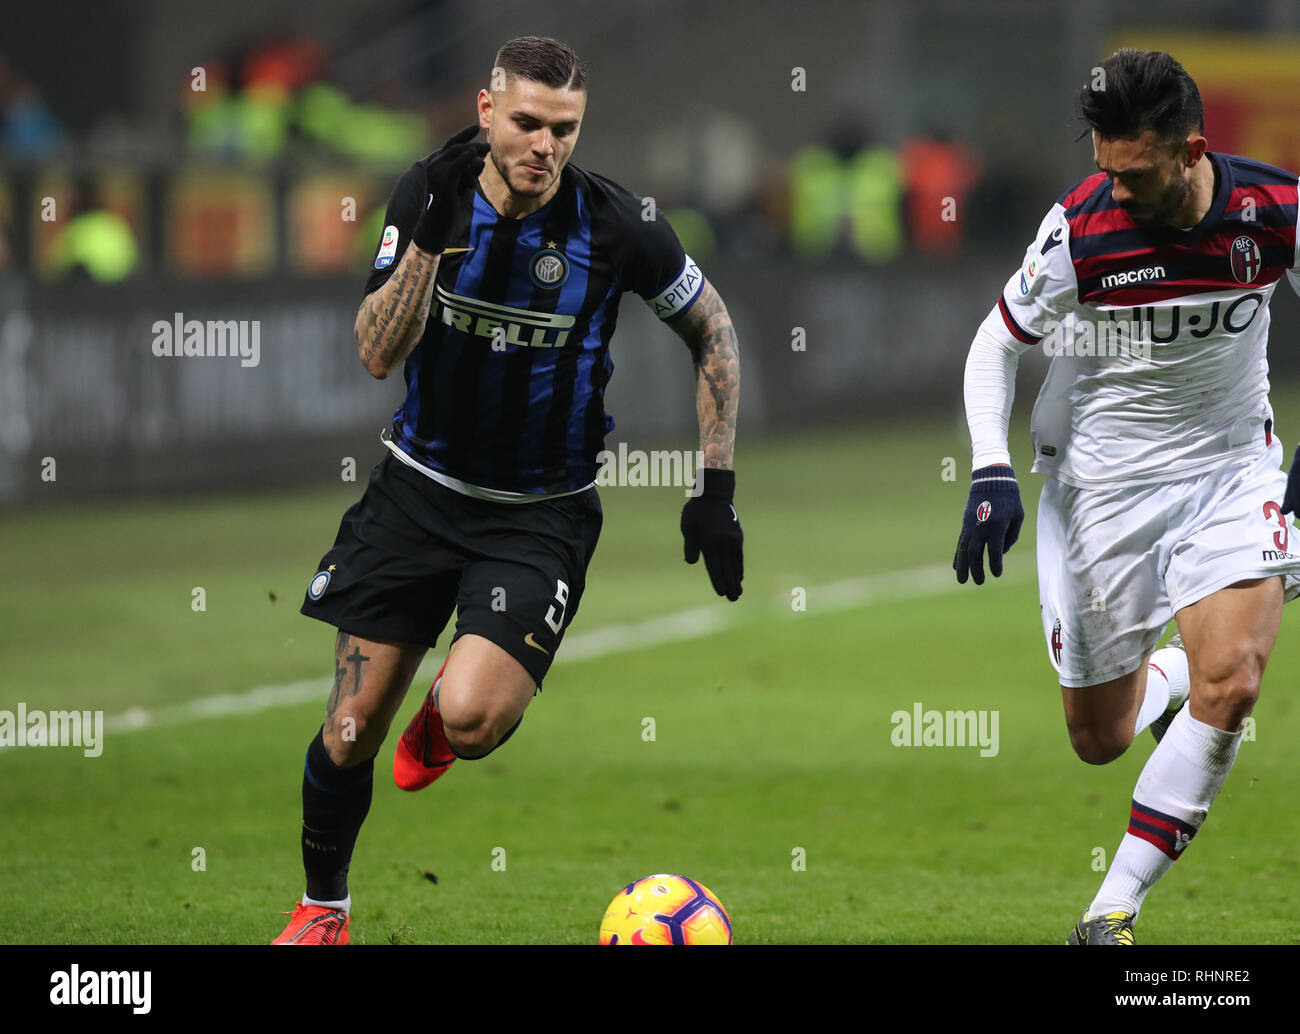 Milan. 3rd Feb, 2019. FC Inter's Mauro Icardi (L) vies with Bologna's Giancarlo Gonzalez during the Serie A soccer match between FC Inter and Bologna, in Milan, Italy, Feb.3, 2019. Bologna won 1-0. Credit: Cheng Tingting/Xinhua/Alamy Live News Stock Photo